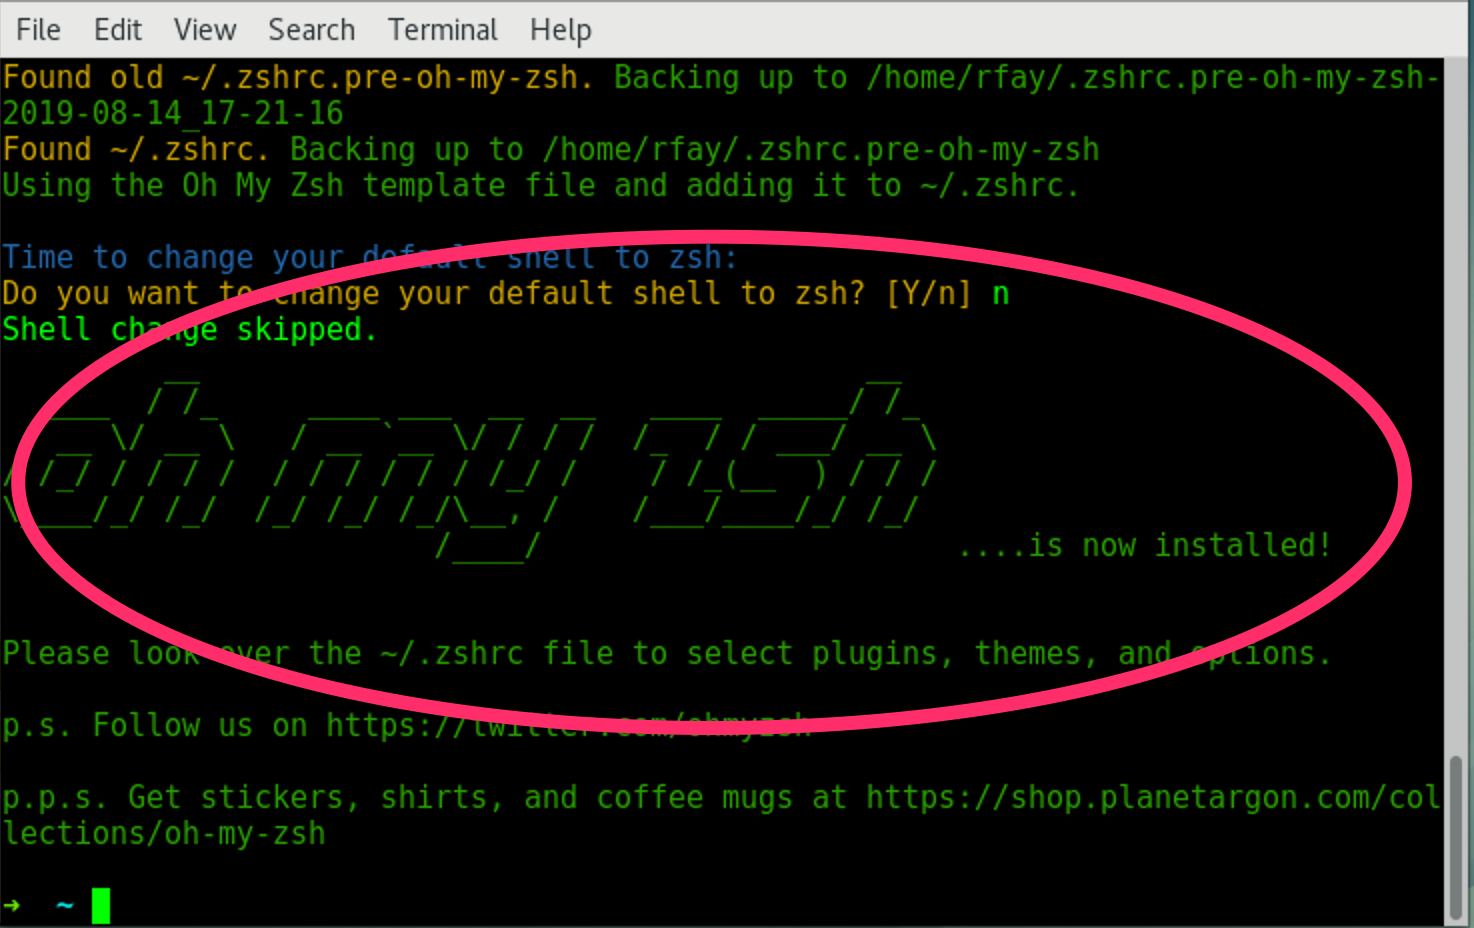 Screenshot of a terminal window, with emphasis on “oh my zsh is now installed!”